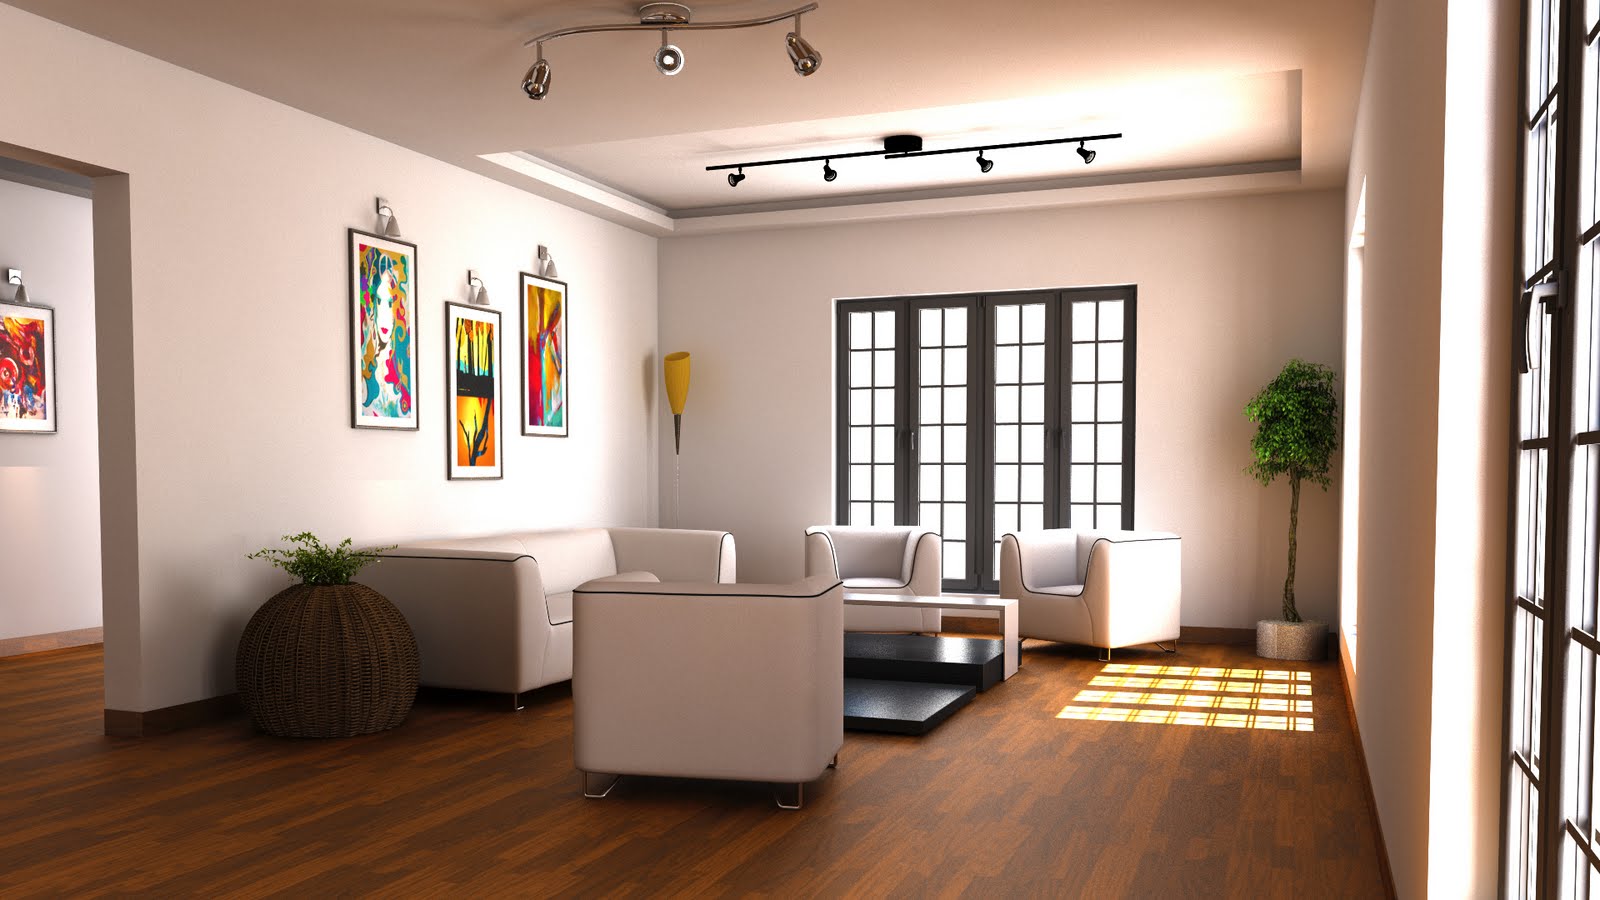 Interior Spaces in Mental Ray3D Models,AD Works,Art Images,Wallpaper ...